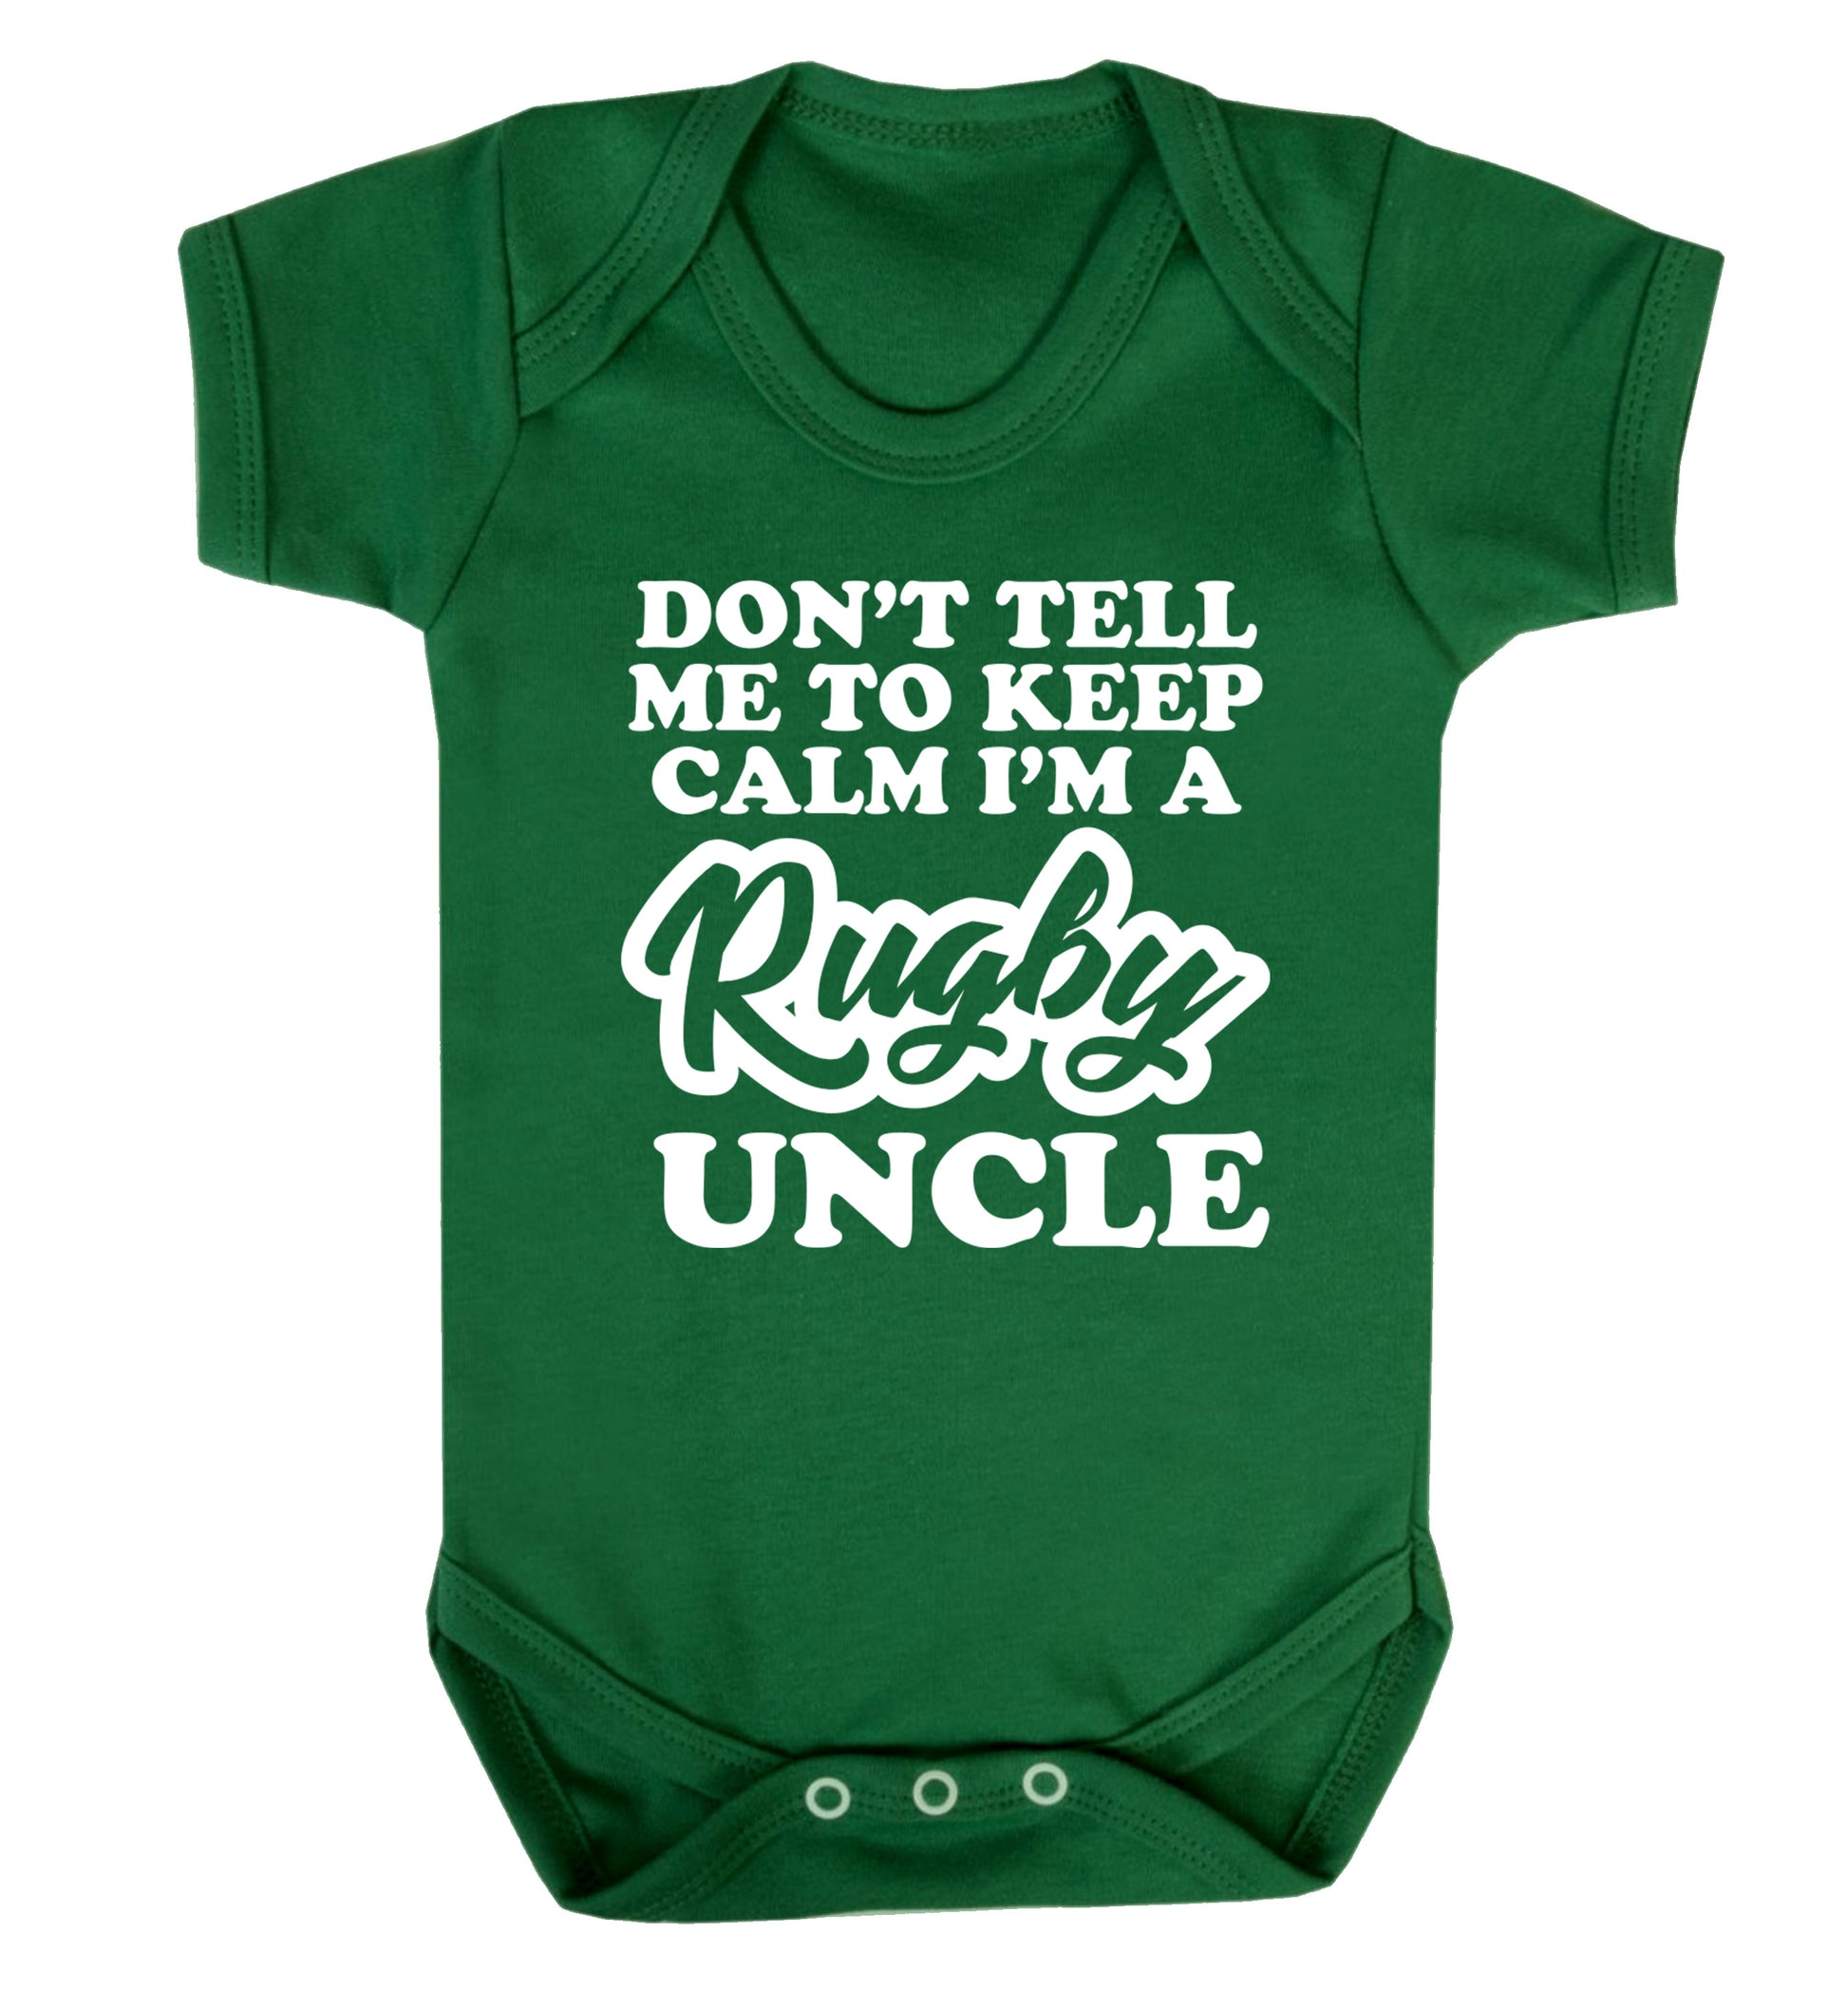 Don't tell me to keep calm I'm a rugby uncle Baby Vest green 18-24 months